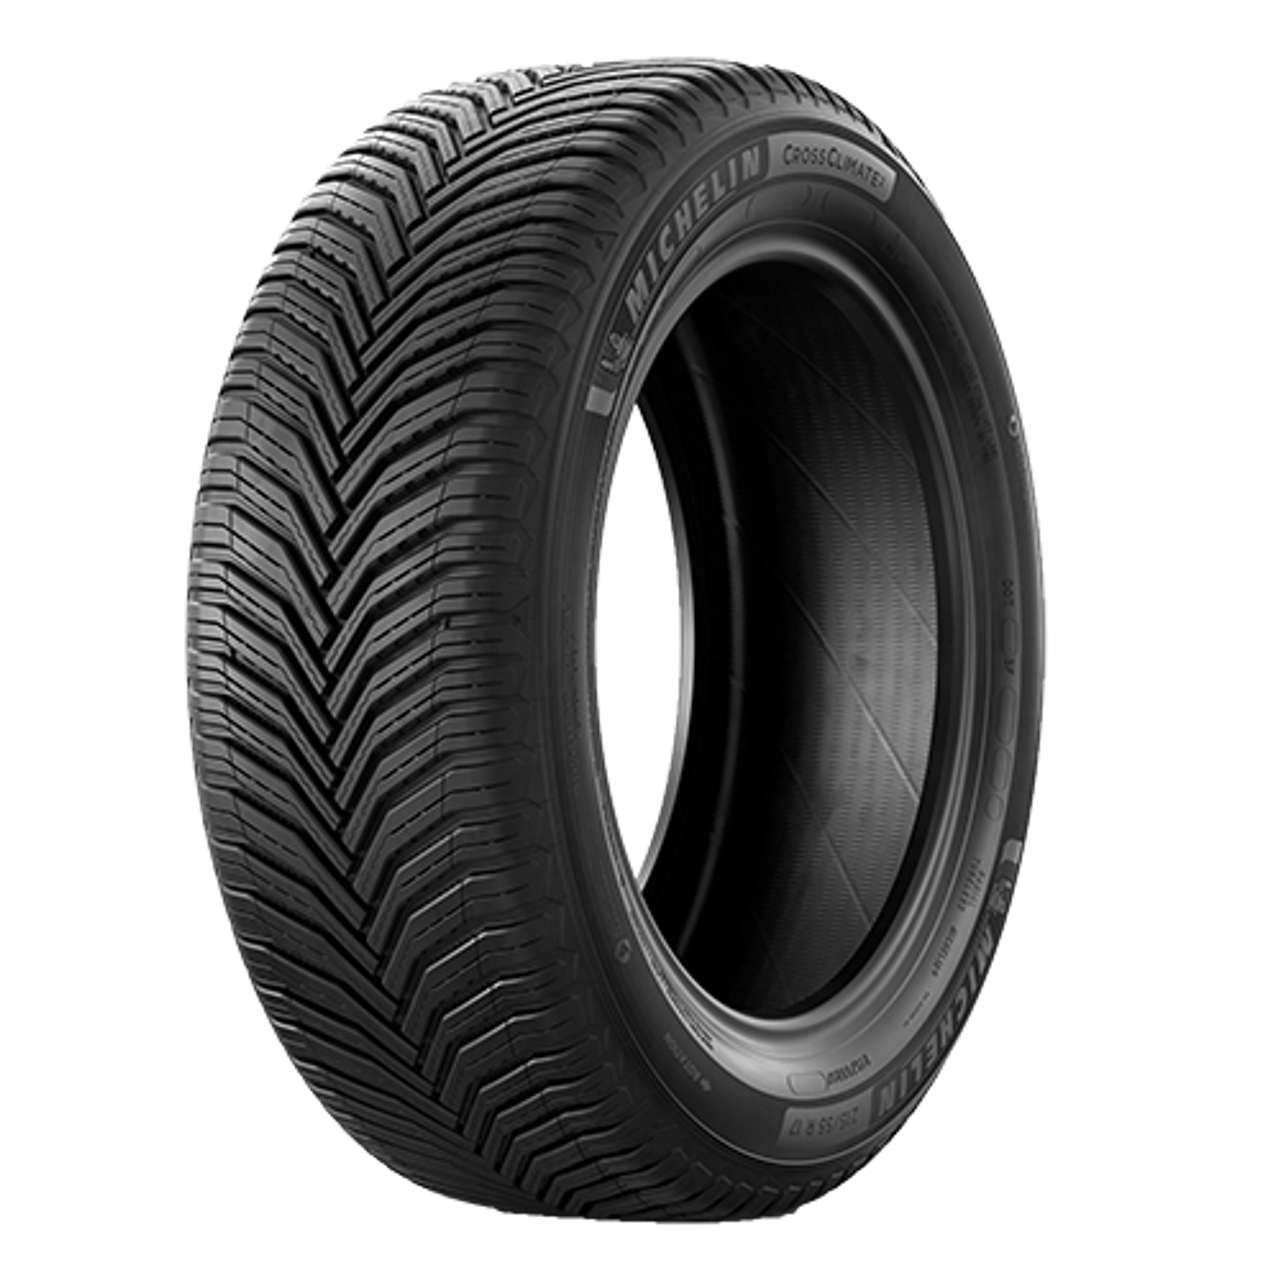 MICHELIN CROSSCLIMATE 2 225/40R19 93Y BSW